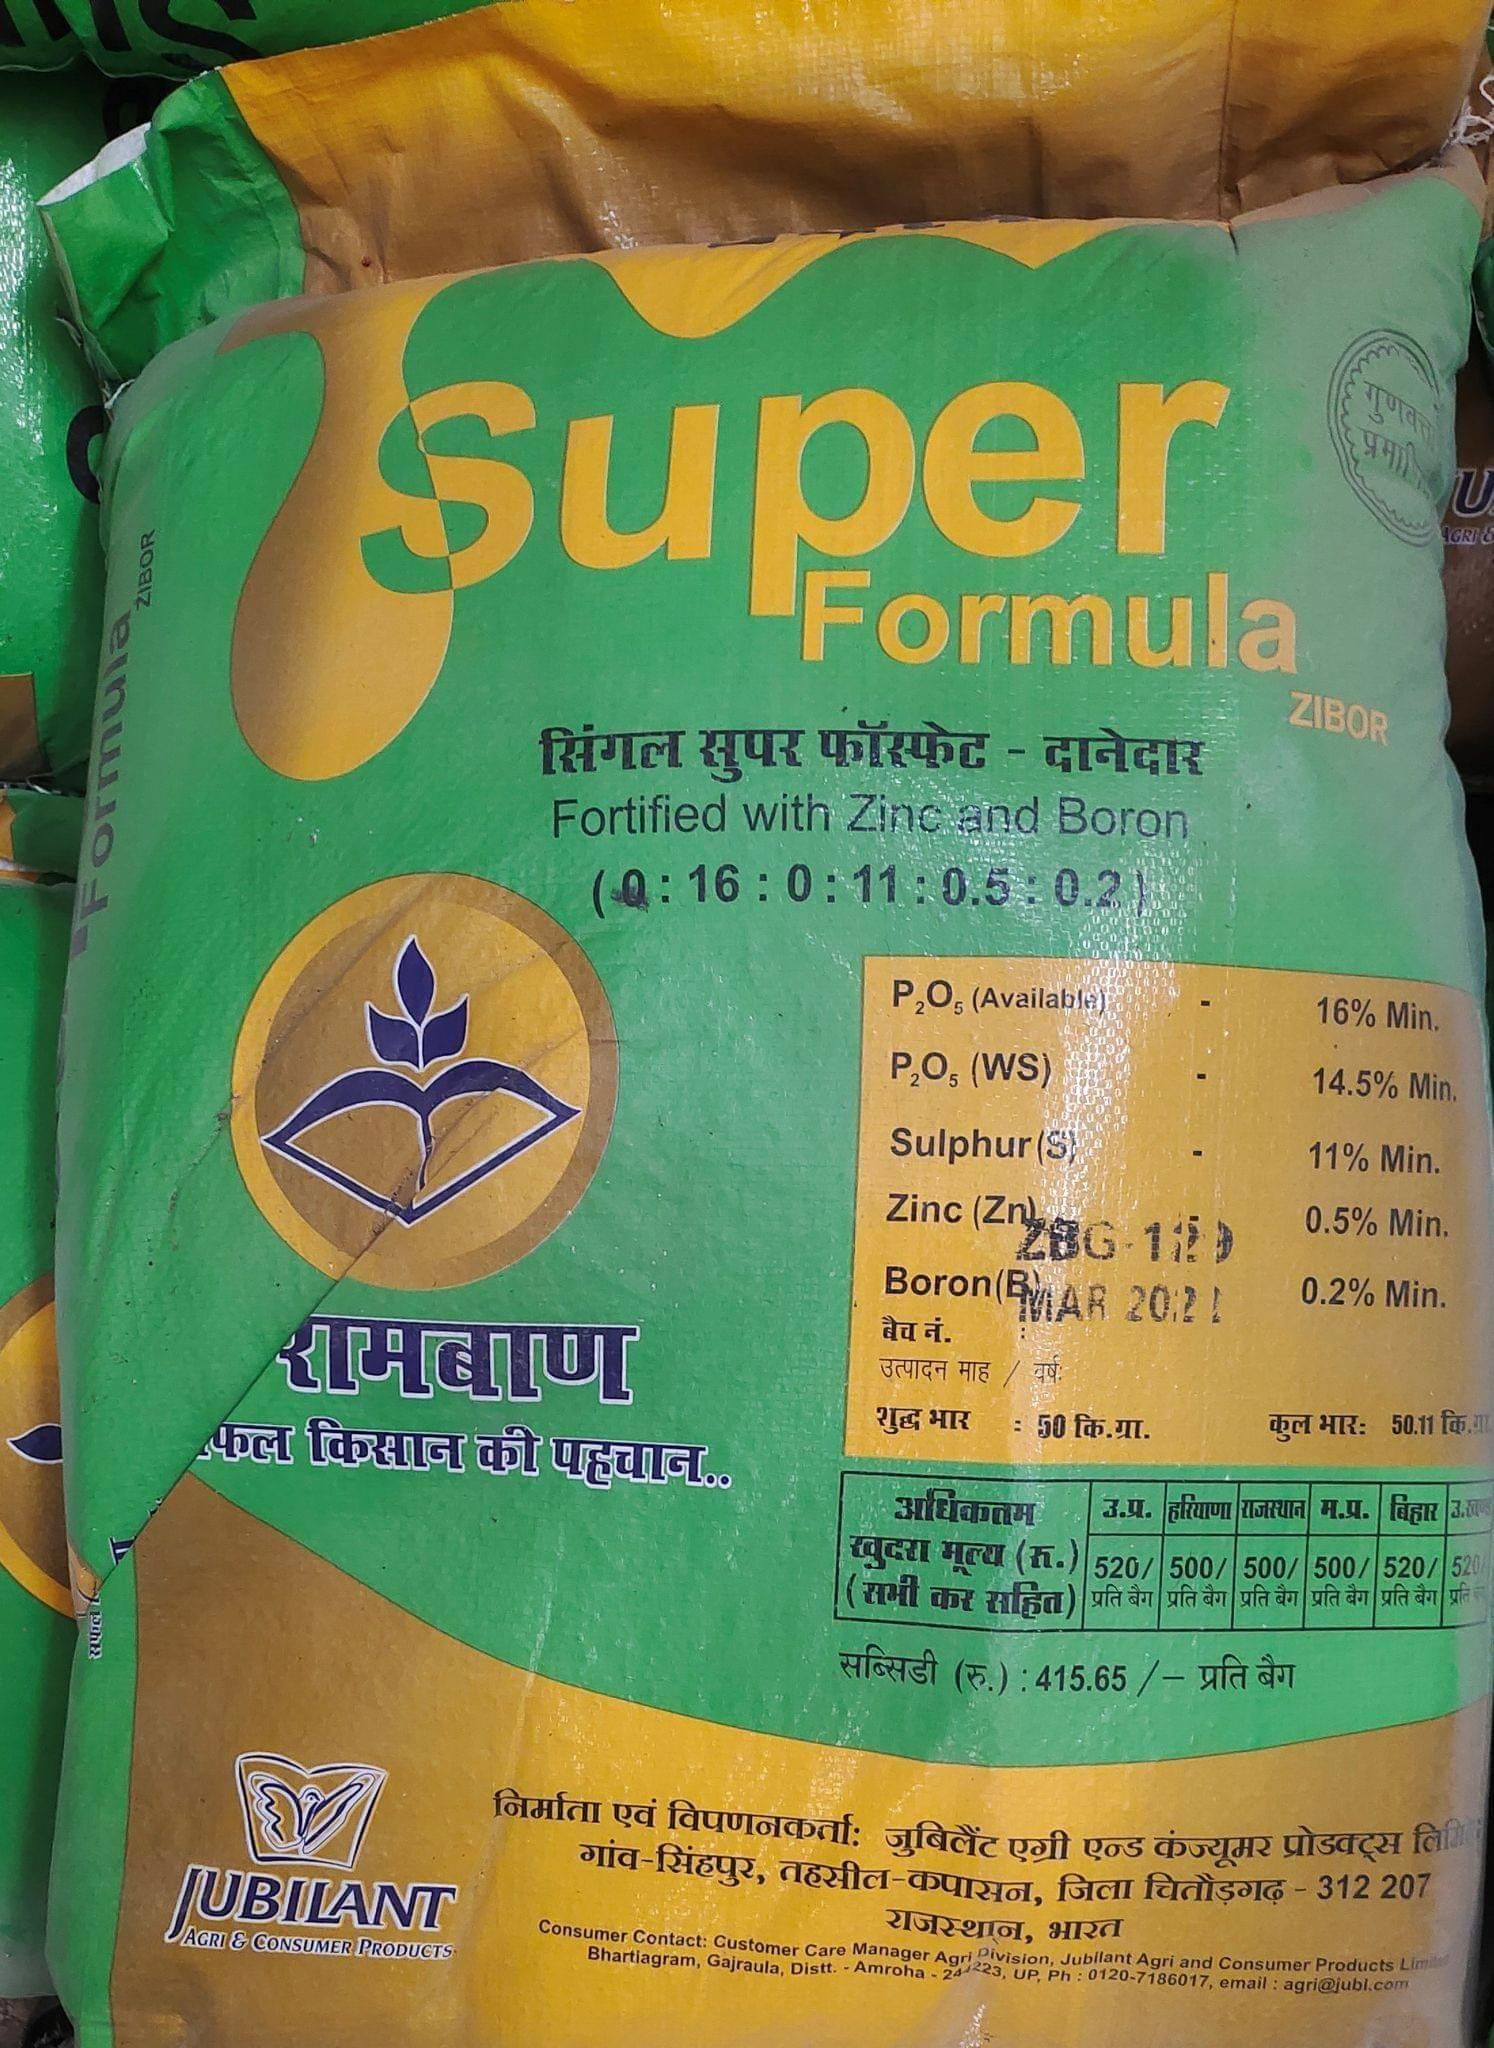 Superformula-SSP Fortified with Zinc and Boron (Granular)